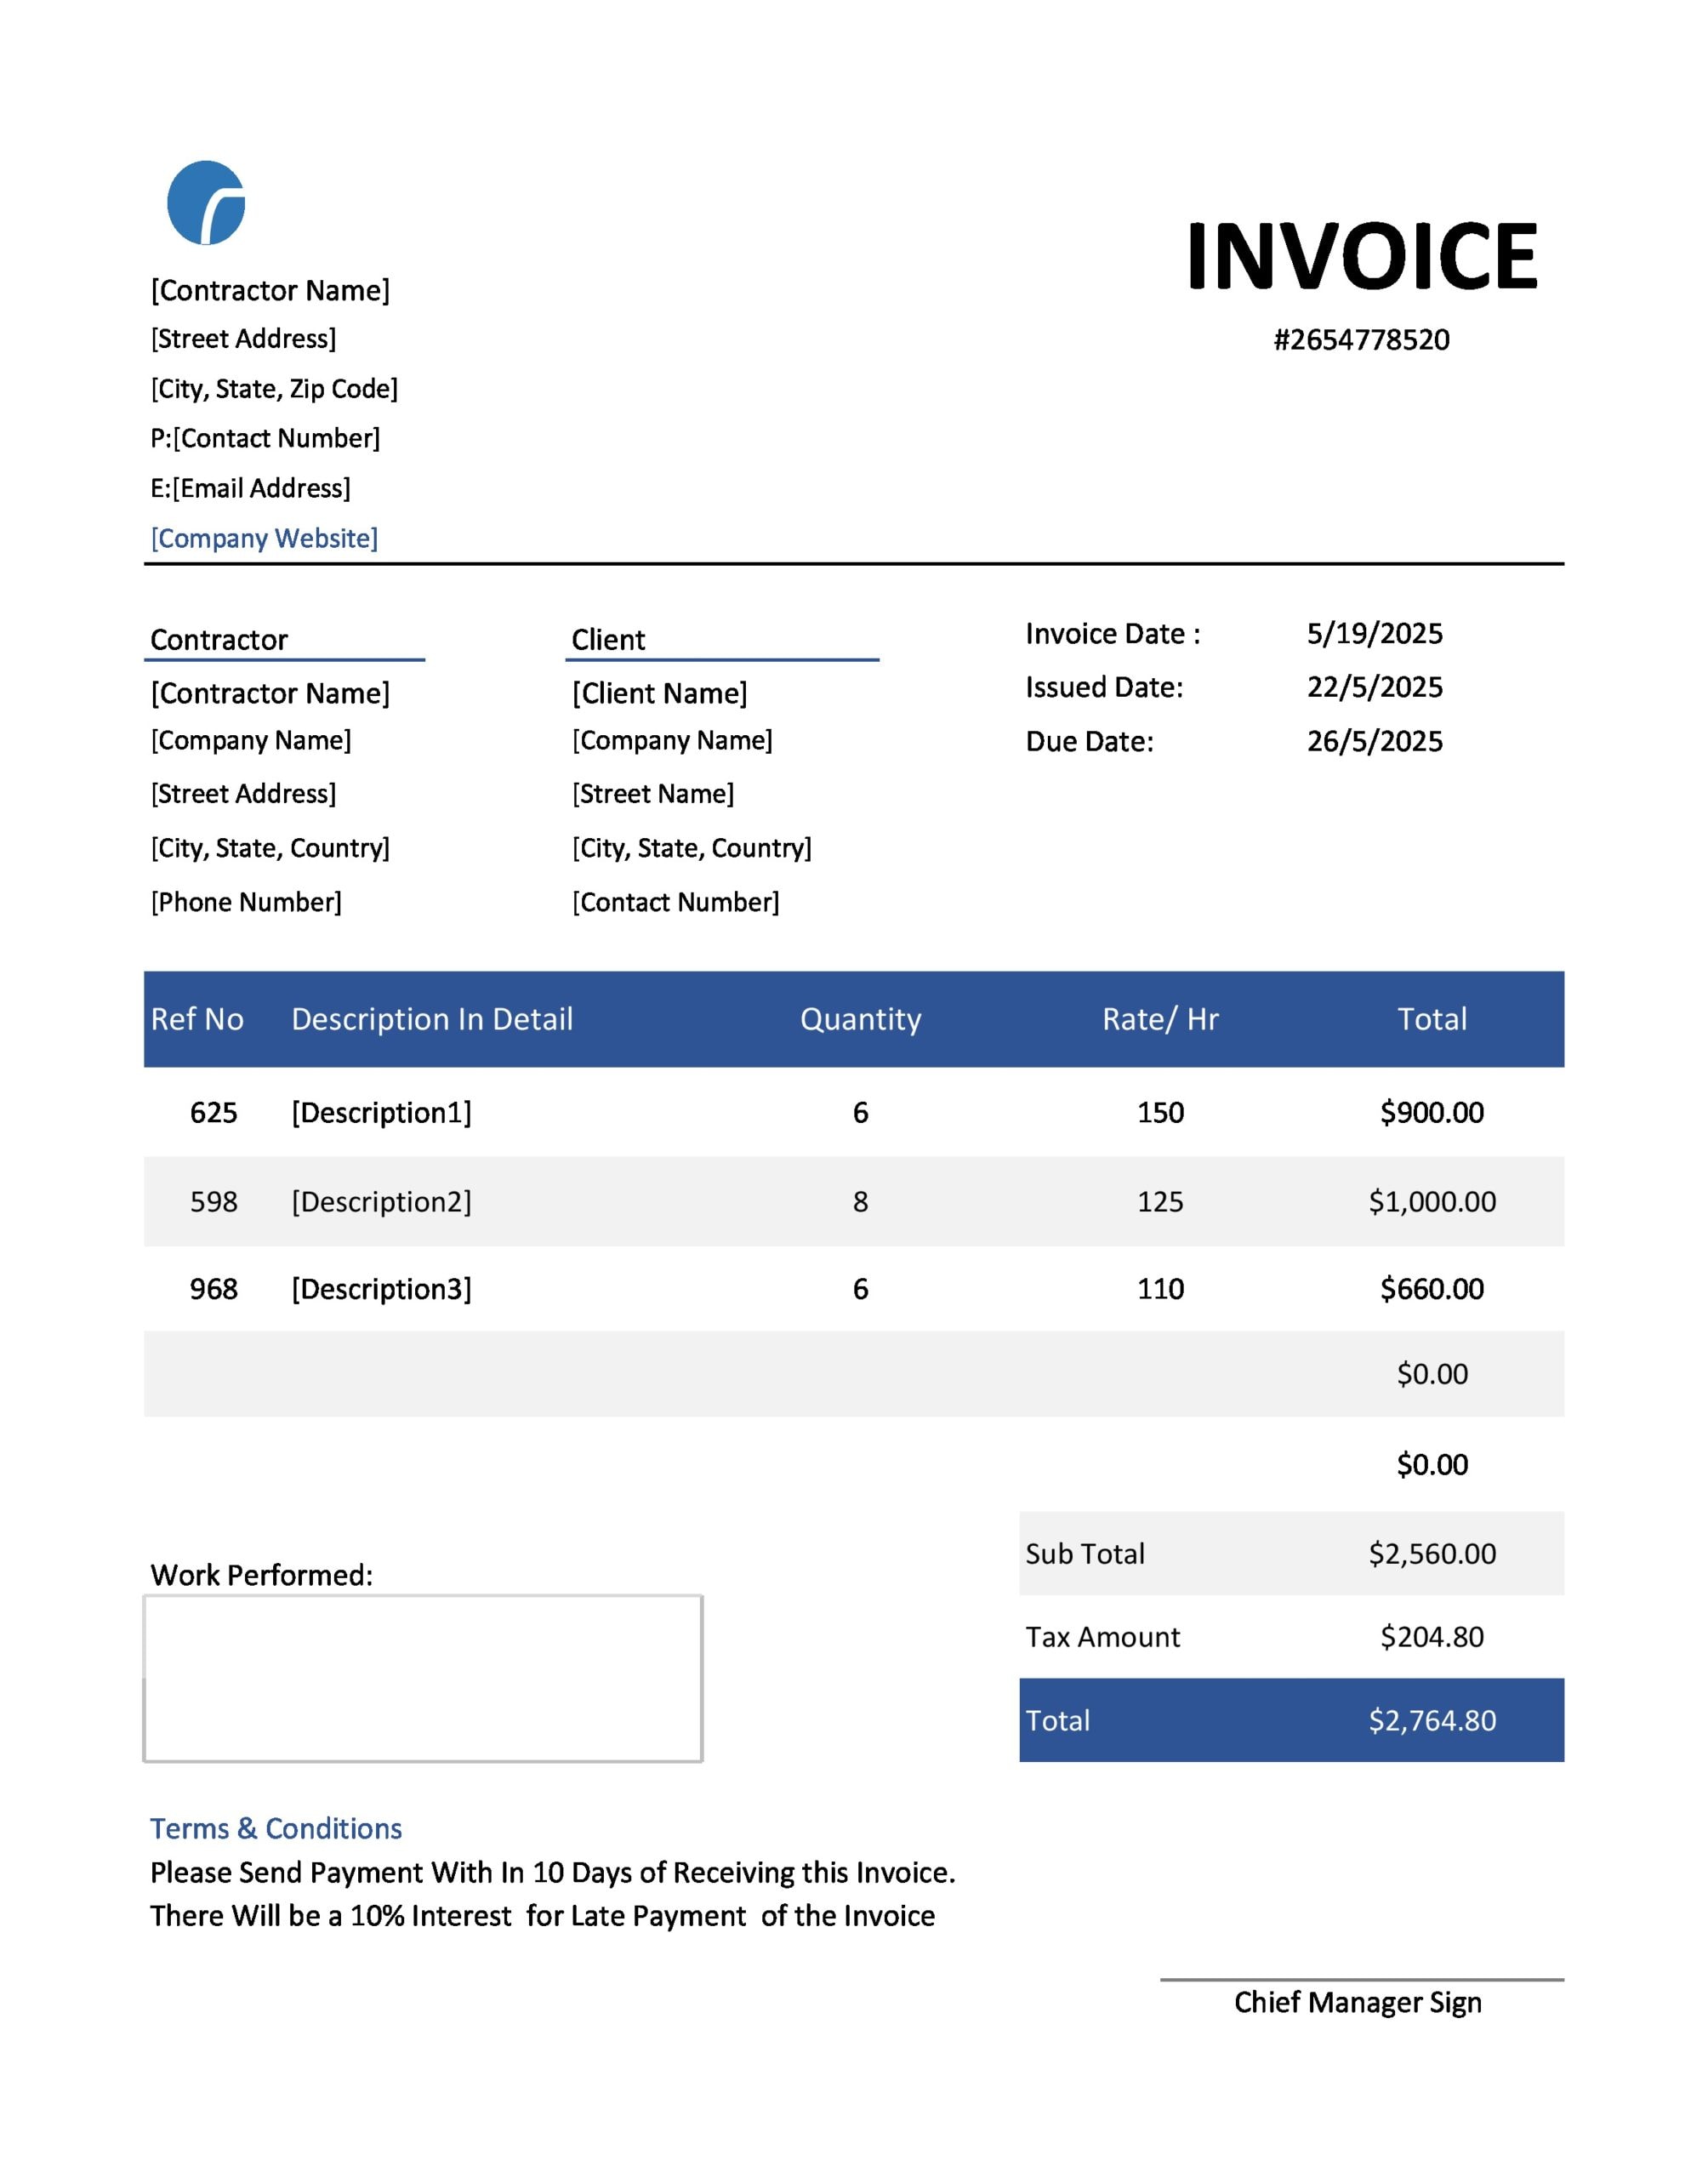 Sample Invoice For Independent Contractor